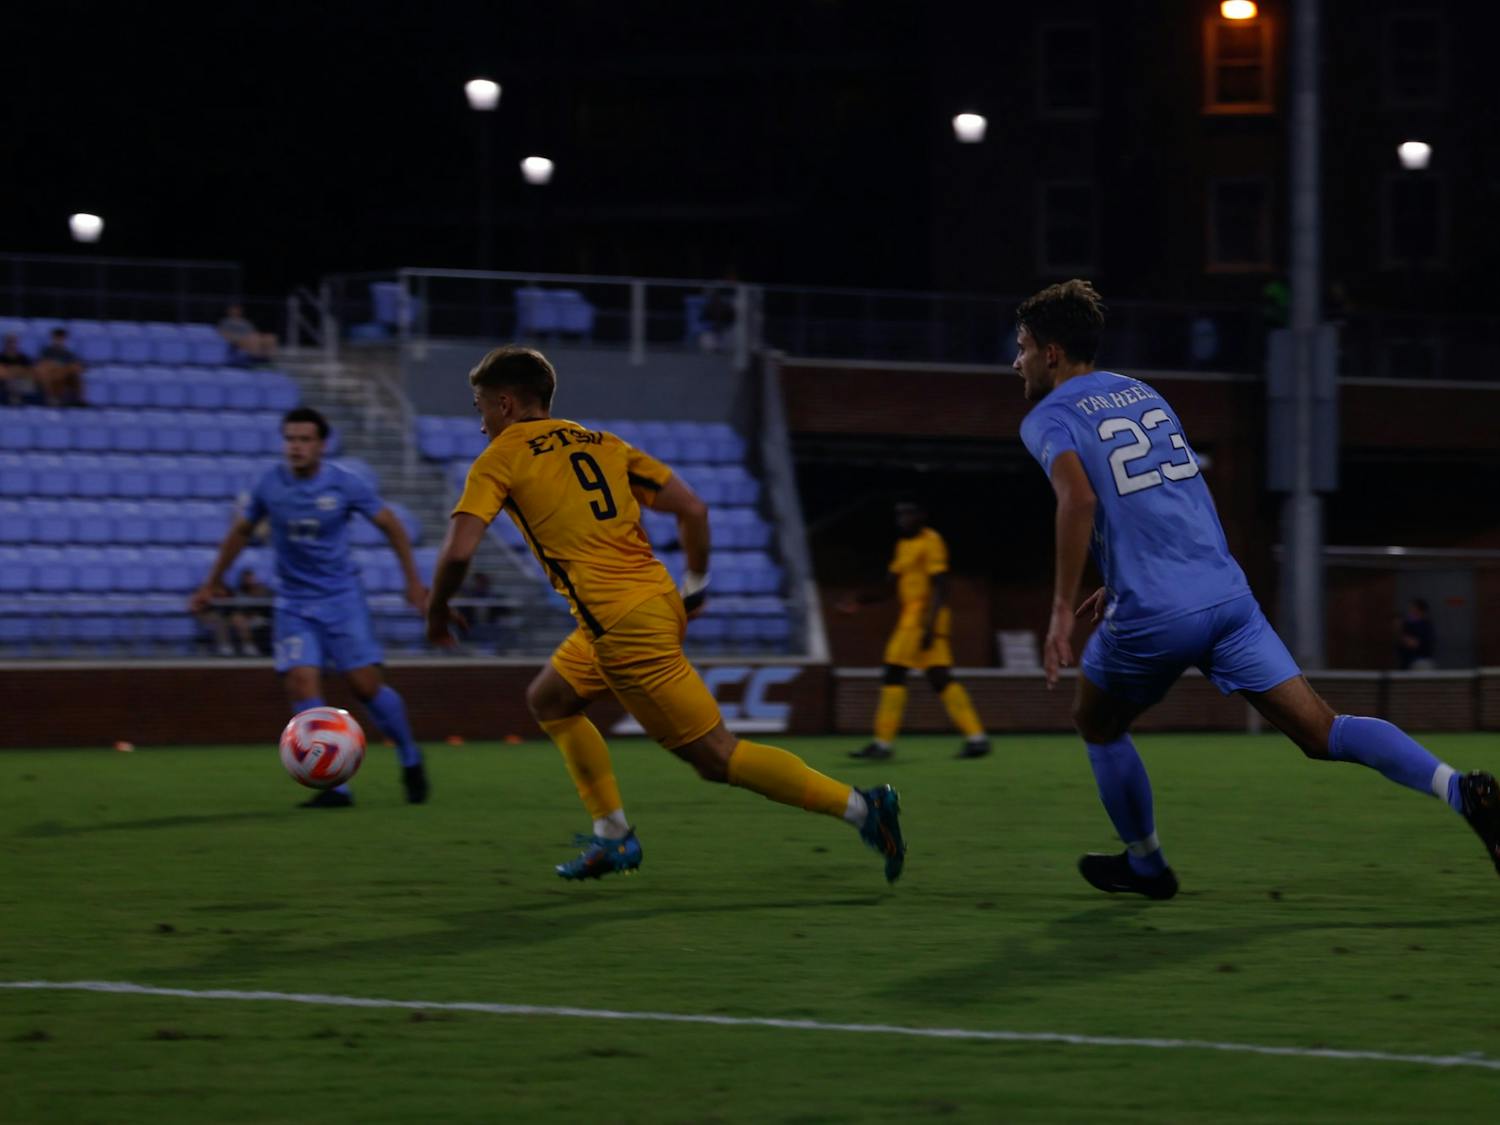 UNC graduate Til Zinhardt (2) defends against East Tennessee State on Tuesday, Sept. 13, 2022 at the UNC men's soccer game at Dorrance Field.